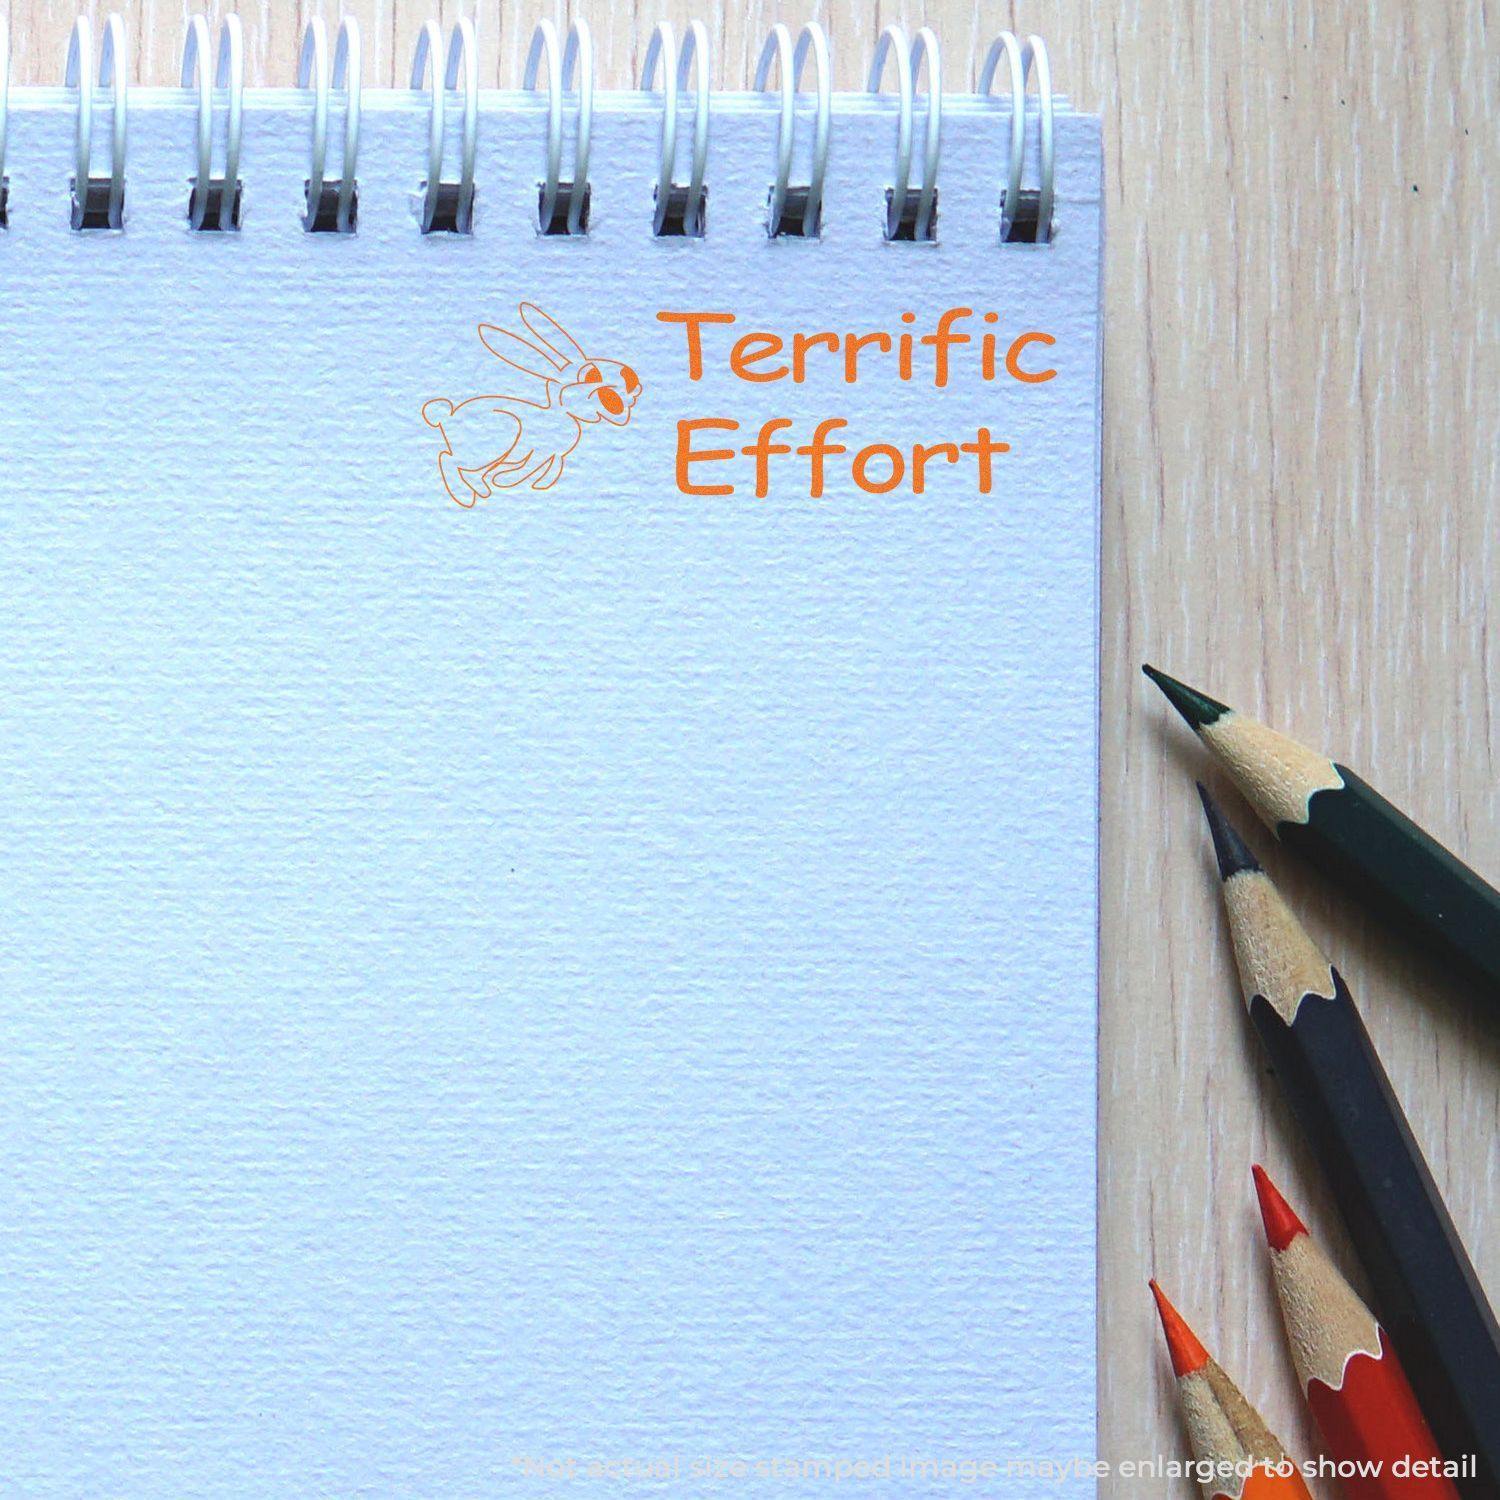 A stock office rubber stamp with a stamped image showing how the text "Terrific Effort" in a large font with an image of a hopping rabbit on the left side is displayed after stamping.